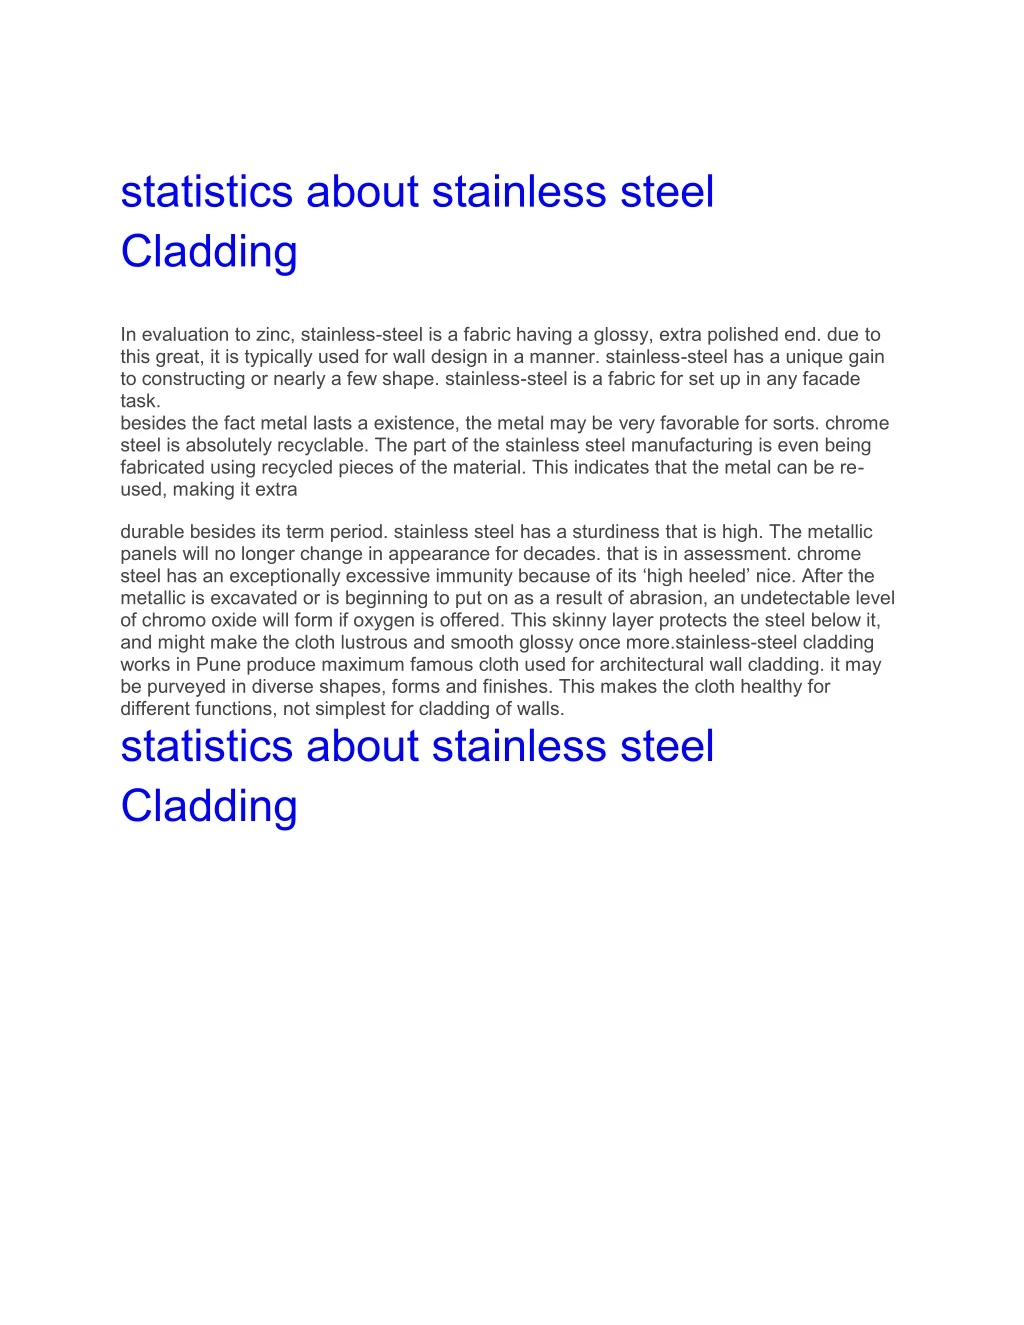 statistics about stainless steel cladding